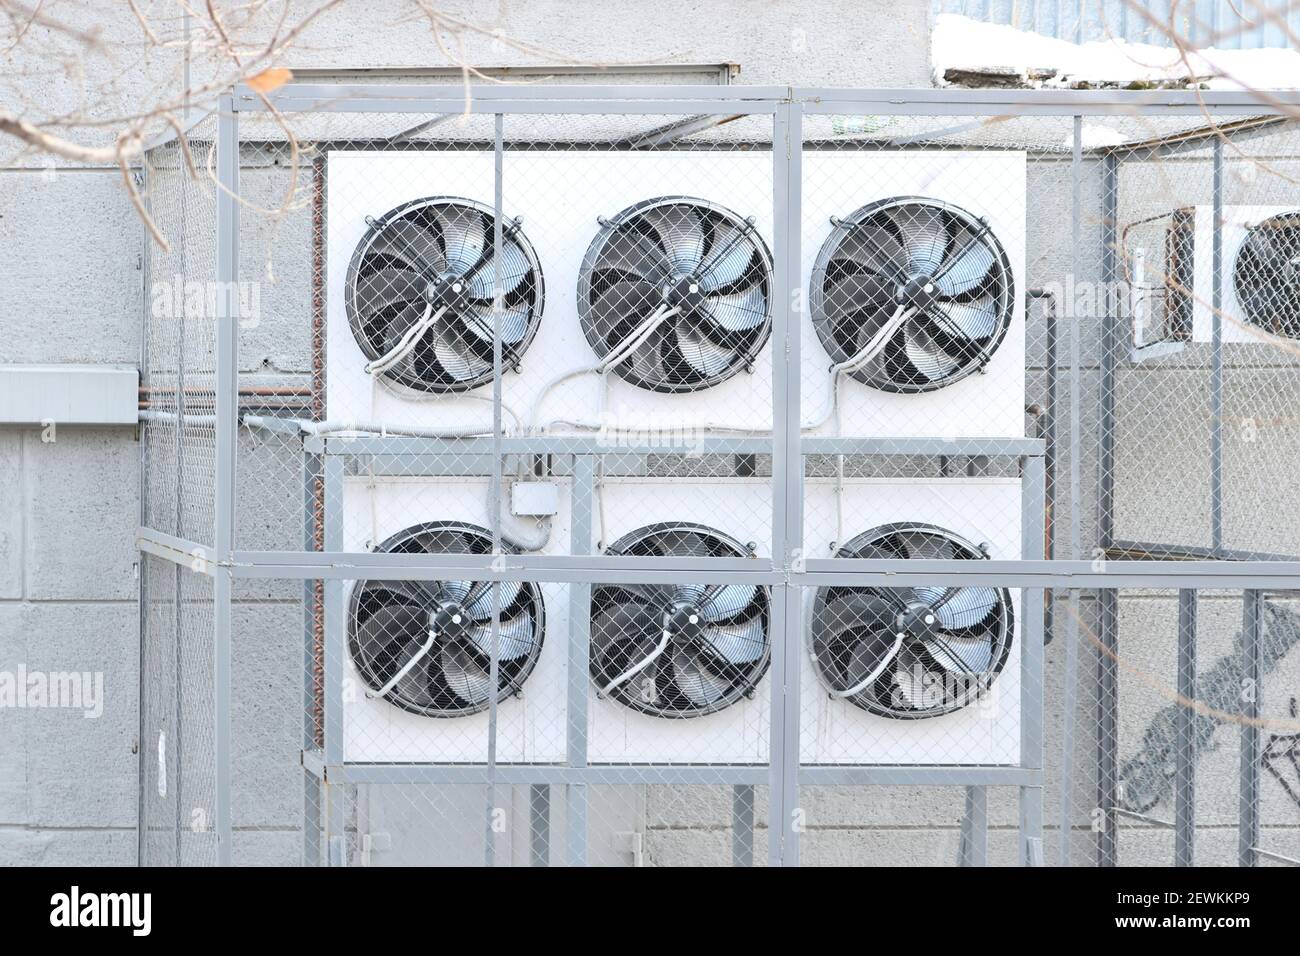 Condenser side of a ductless split-type air conditioner. Air conditioning condenser units outside a building. Stock Photo